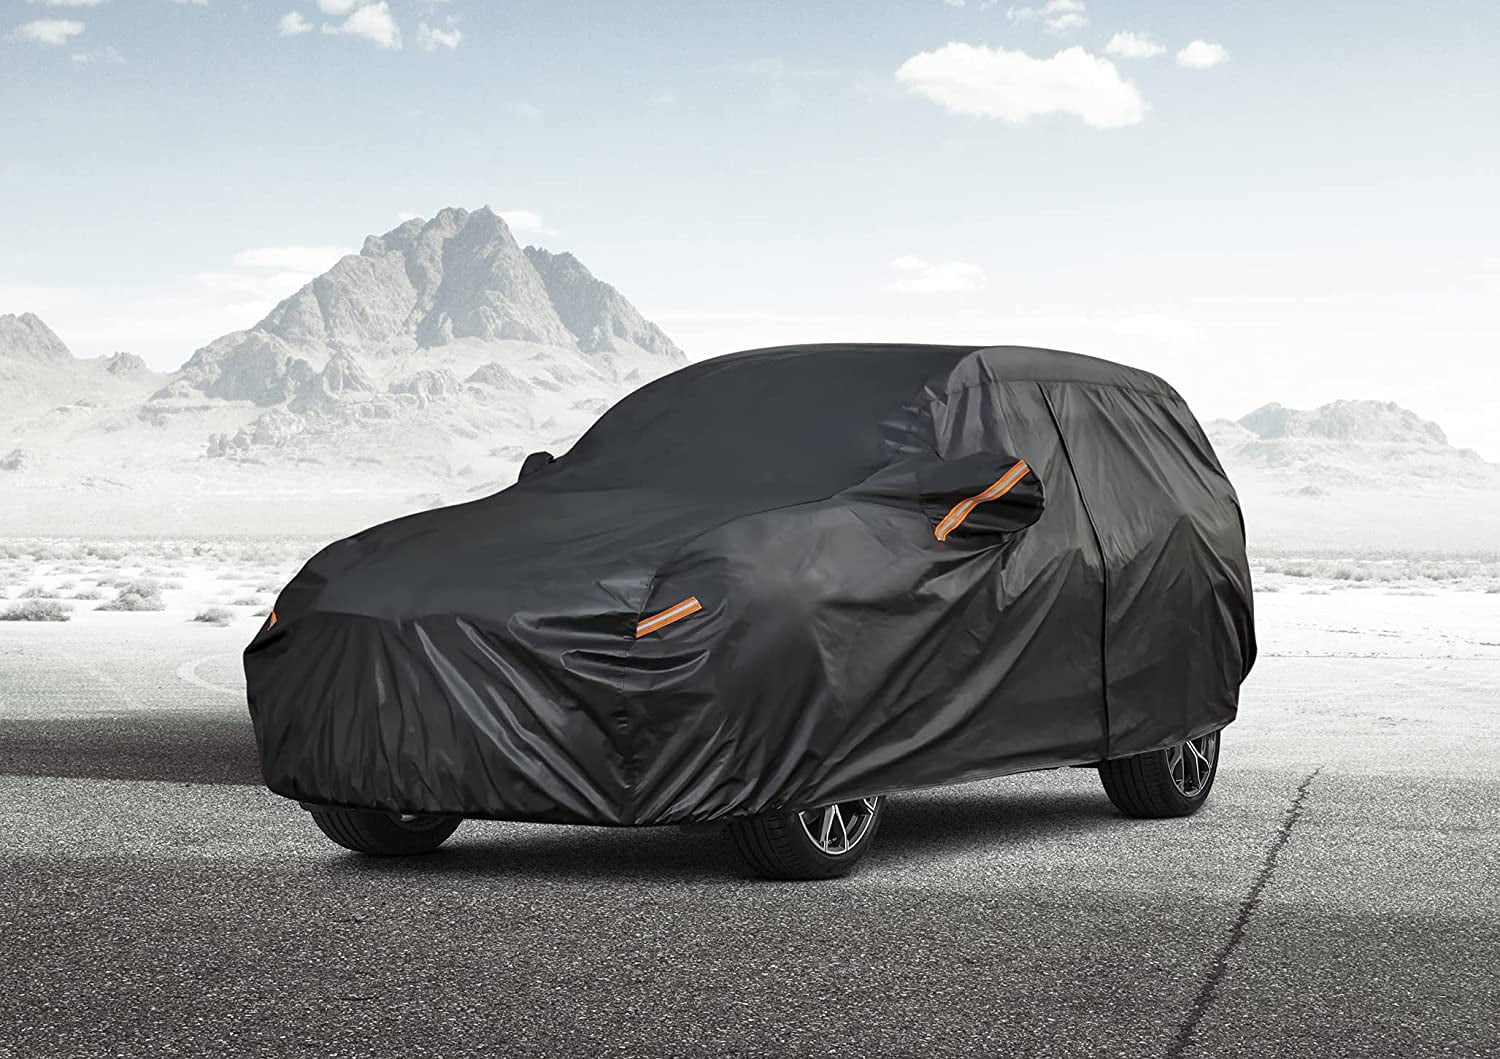 Heavy Duty Suv Car Cover Waterproof All Weather for Automobiles